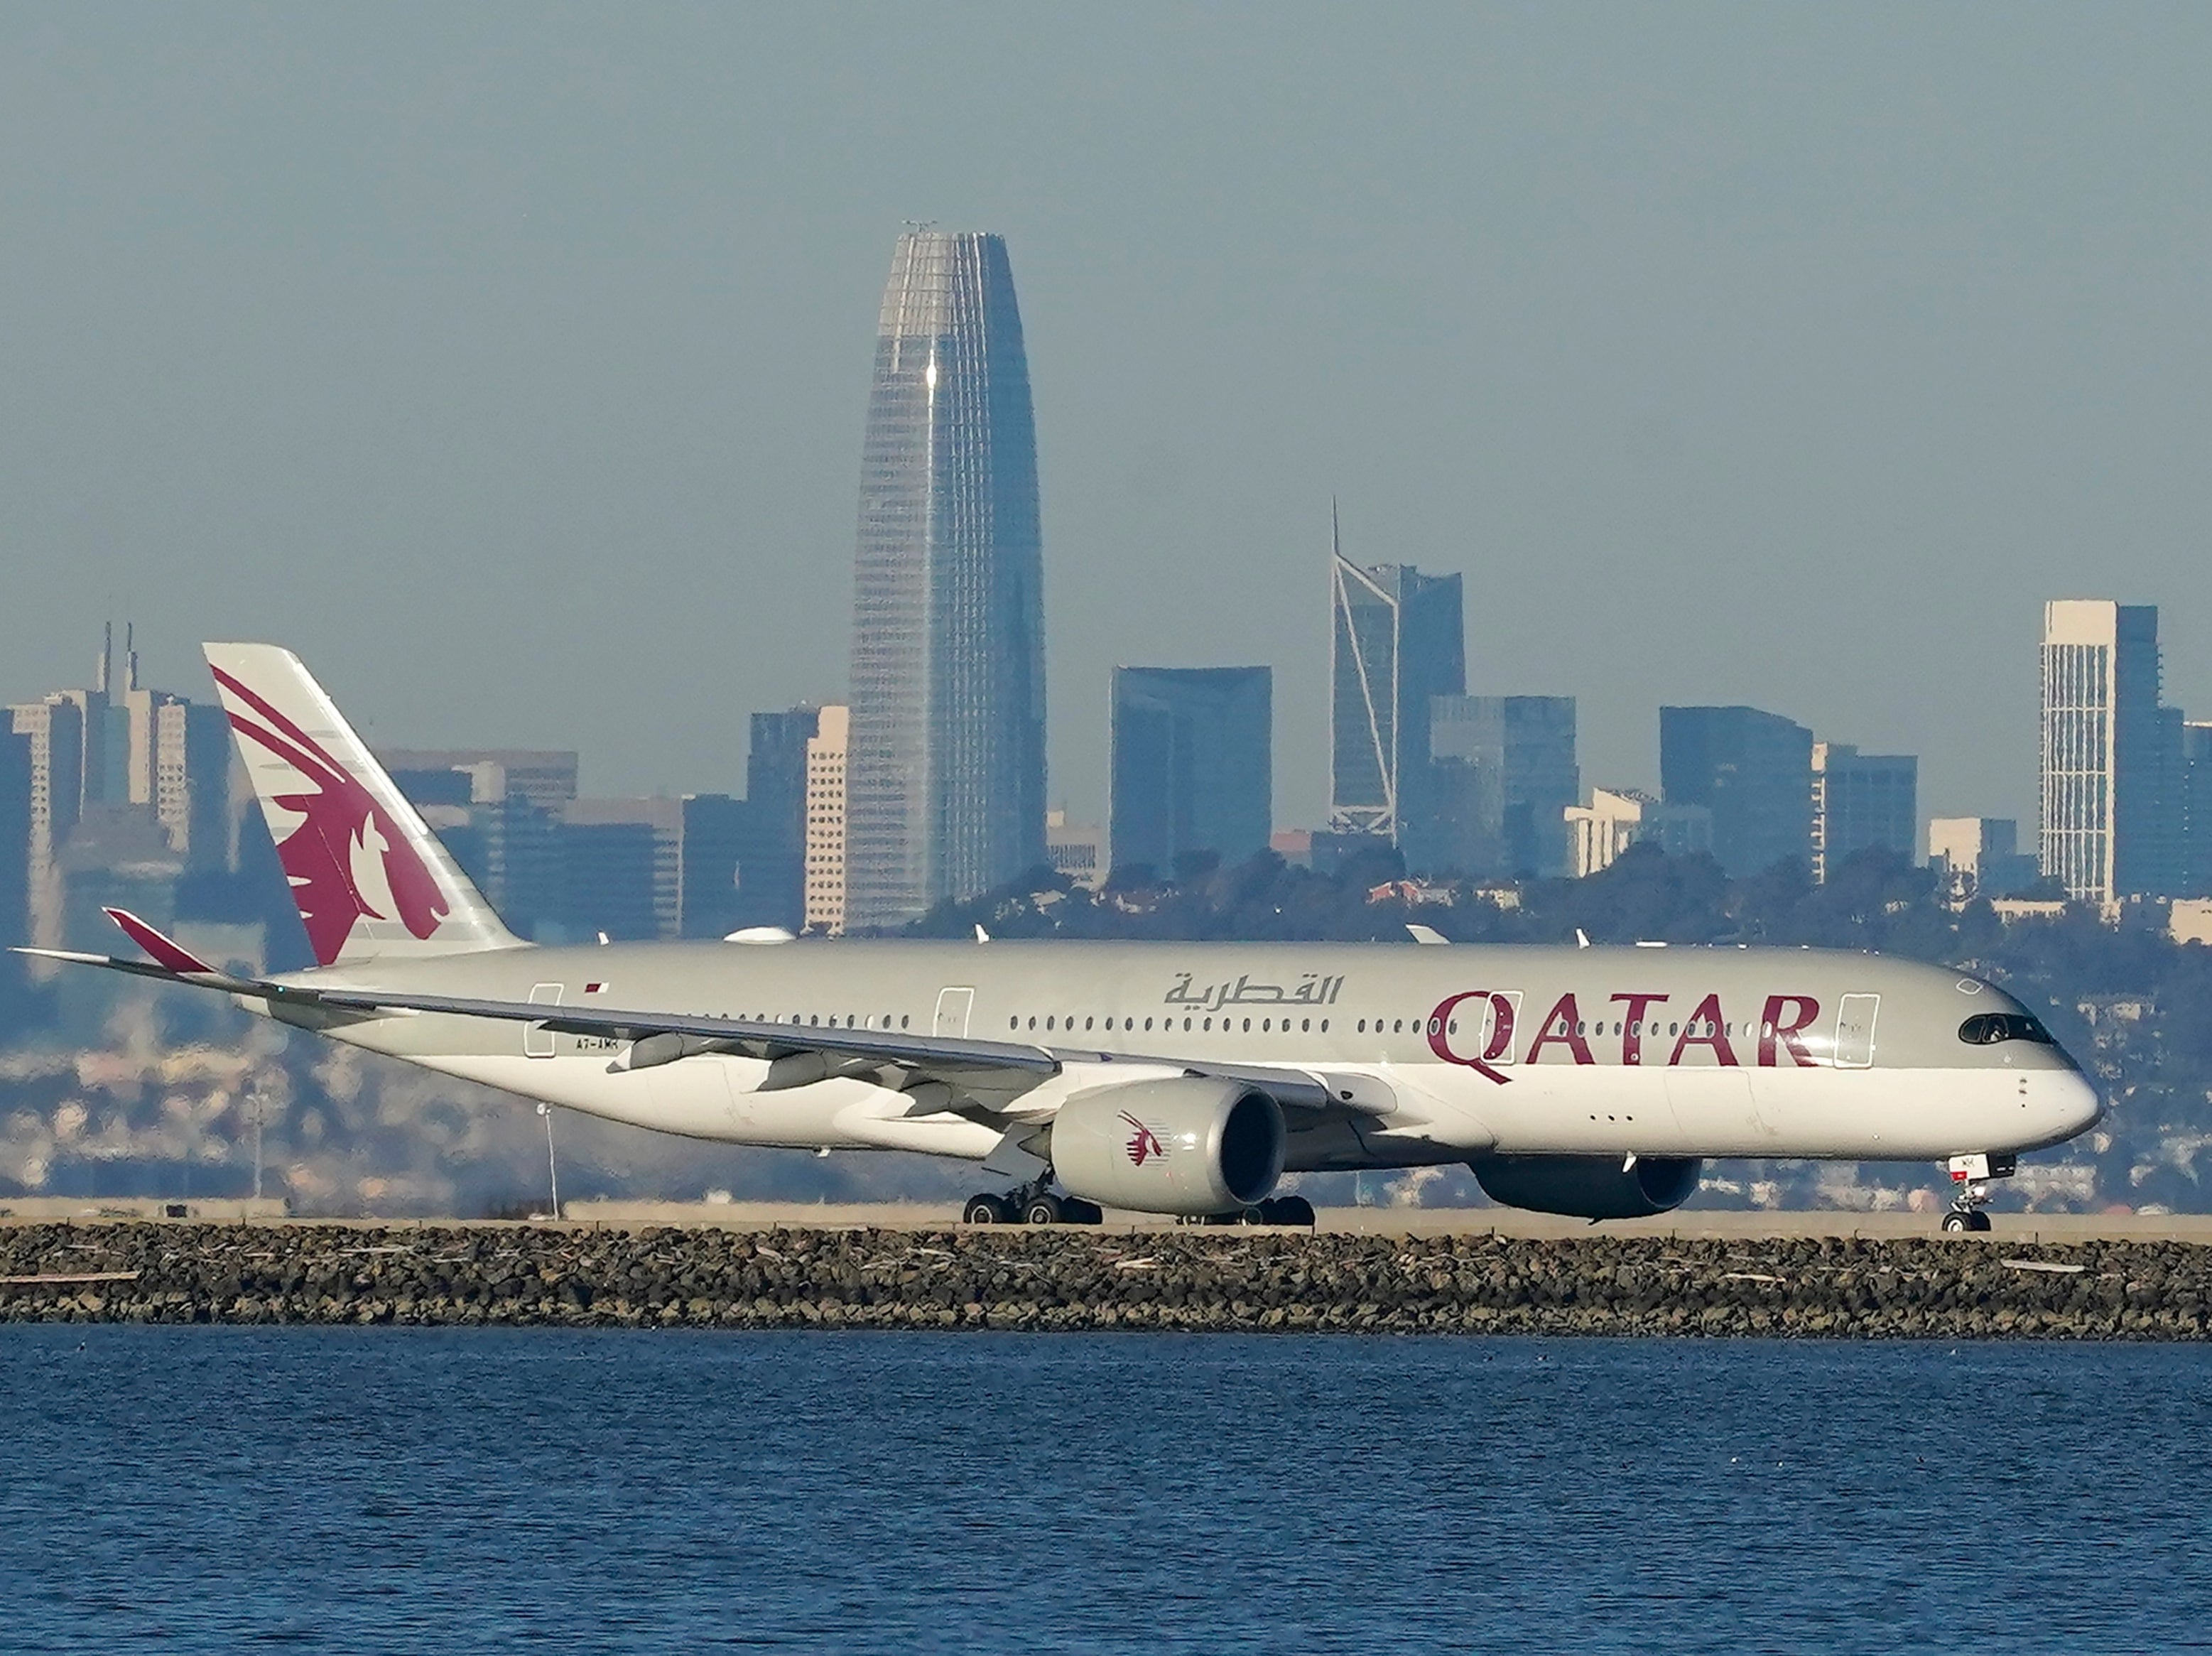 Qatar Airways also won the Excellence in Long Haul - Middle East/Africa Award and Best Business Class awards